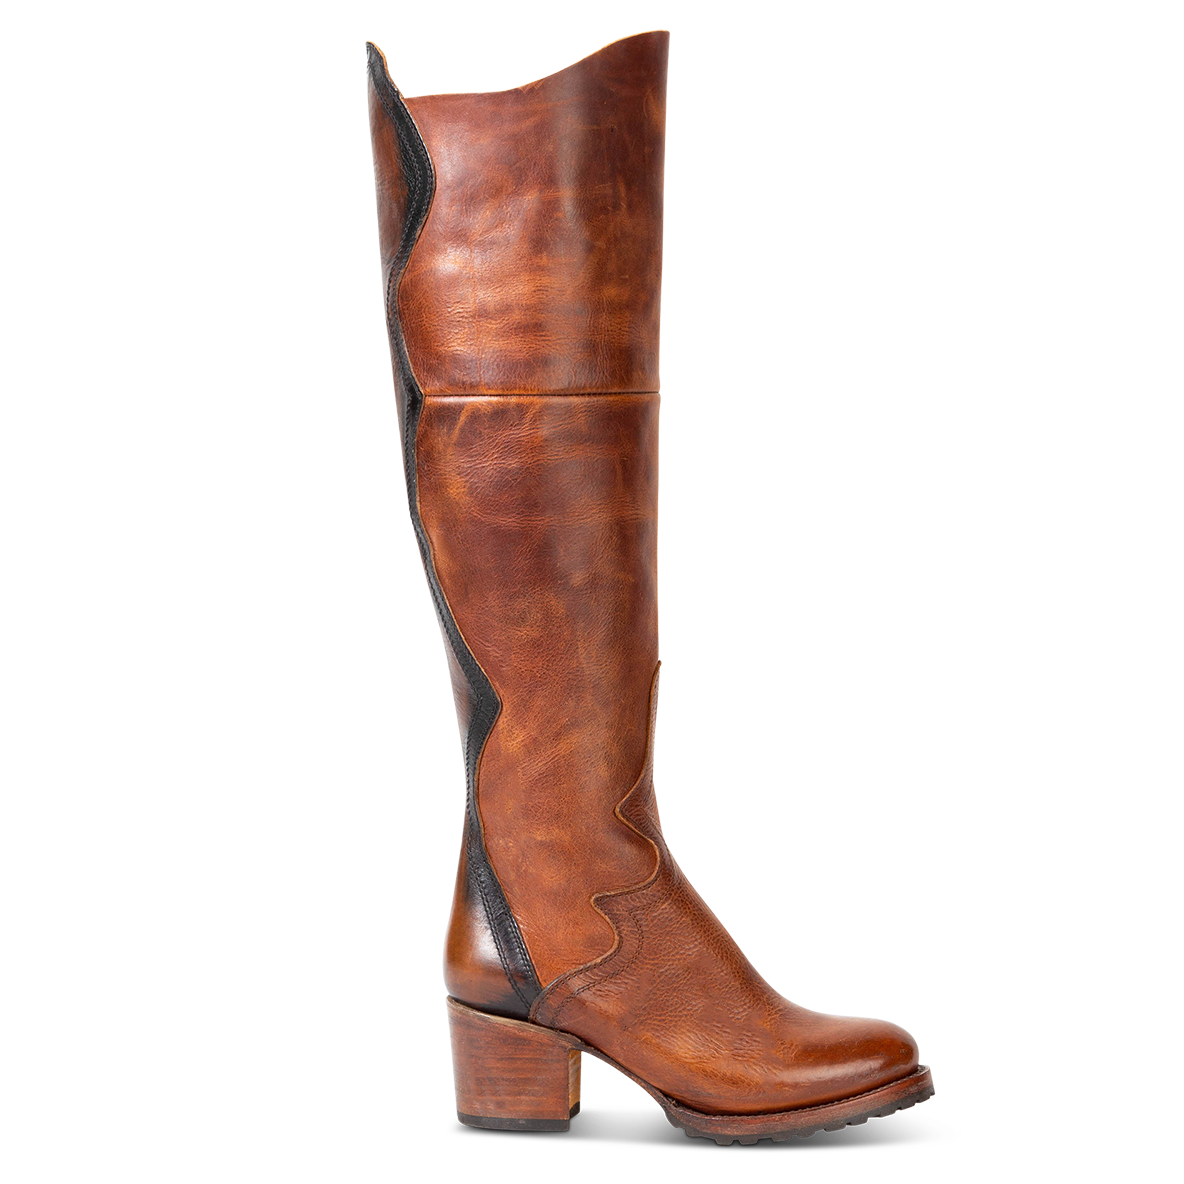 FREEBIRD women's Calgary cognac leather heeled knee high boot with contrasting back panel and rubber tread sole